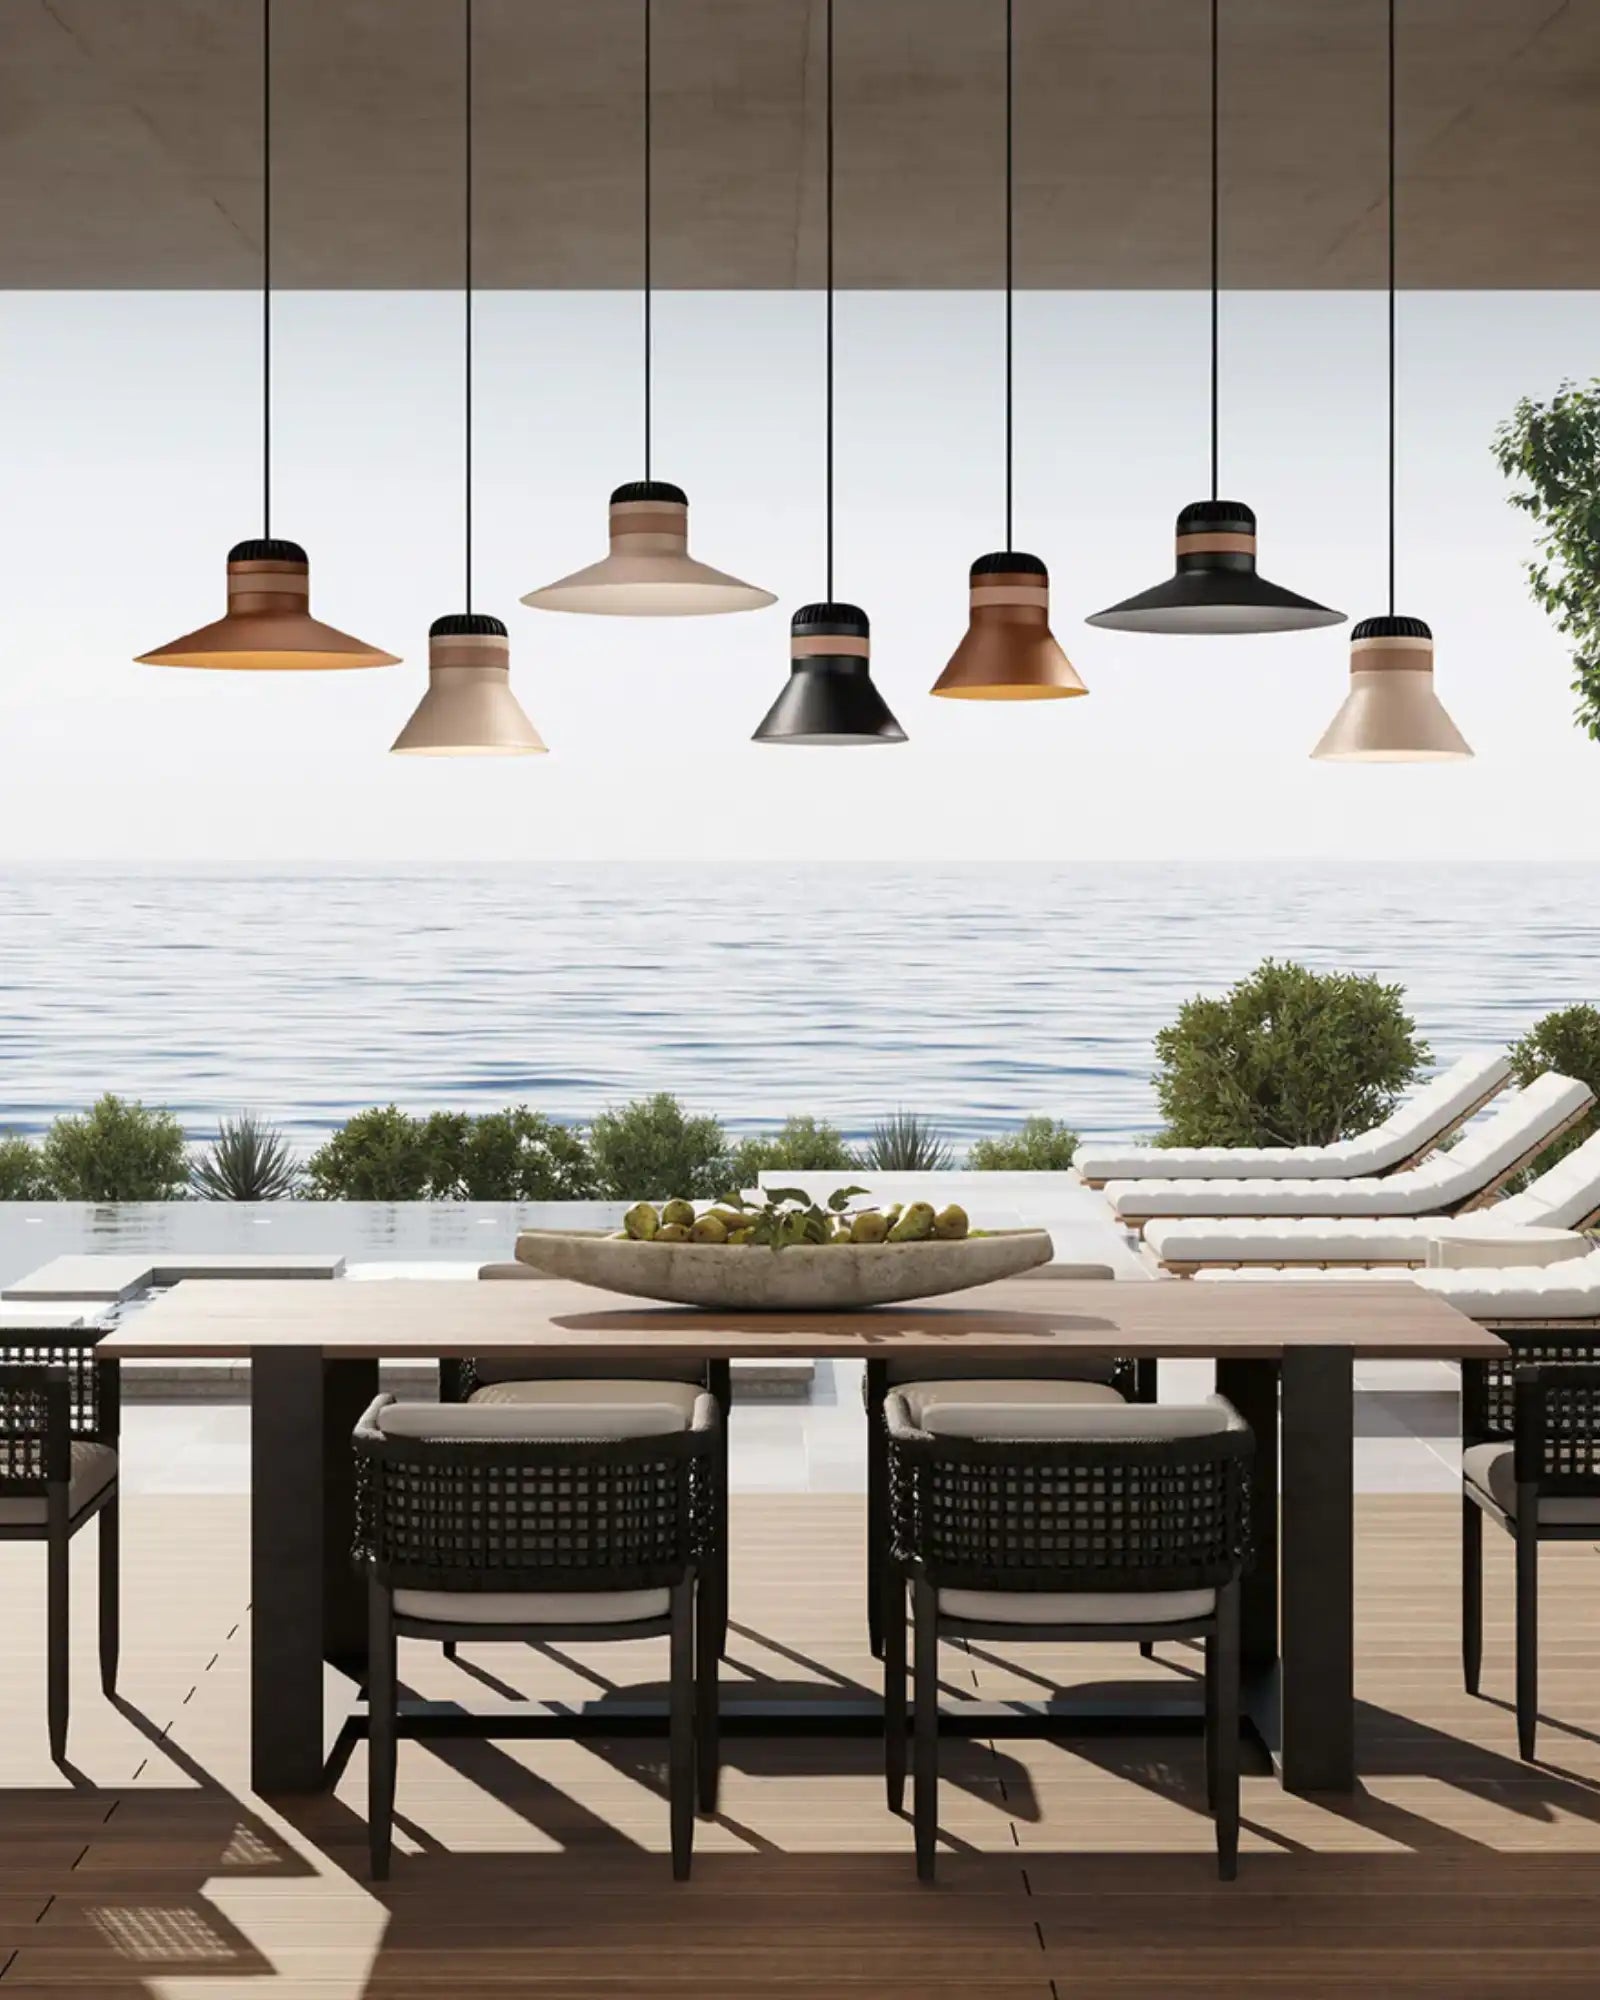 Cordea Outdoor Pendant Light by Masiero Lighting featured in an outdoor dining area | Nook Collections